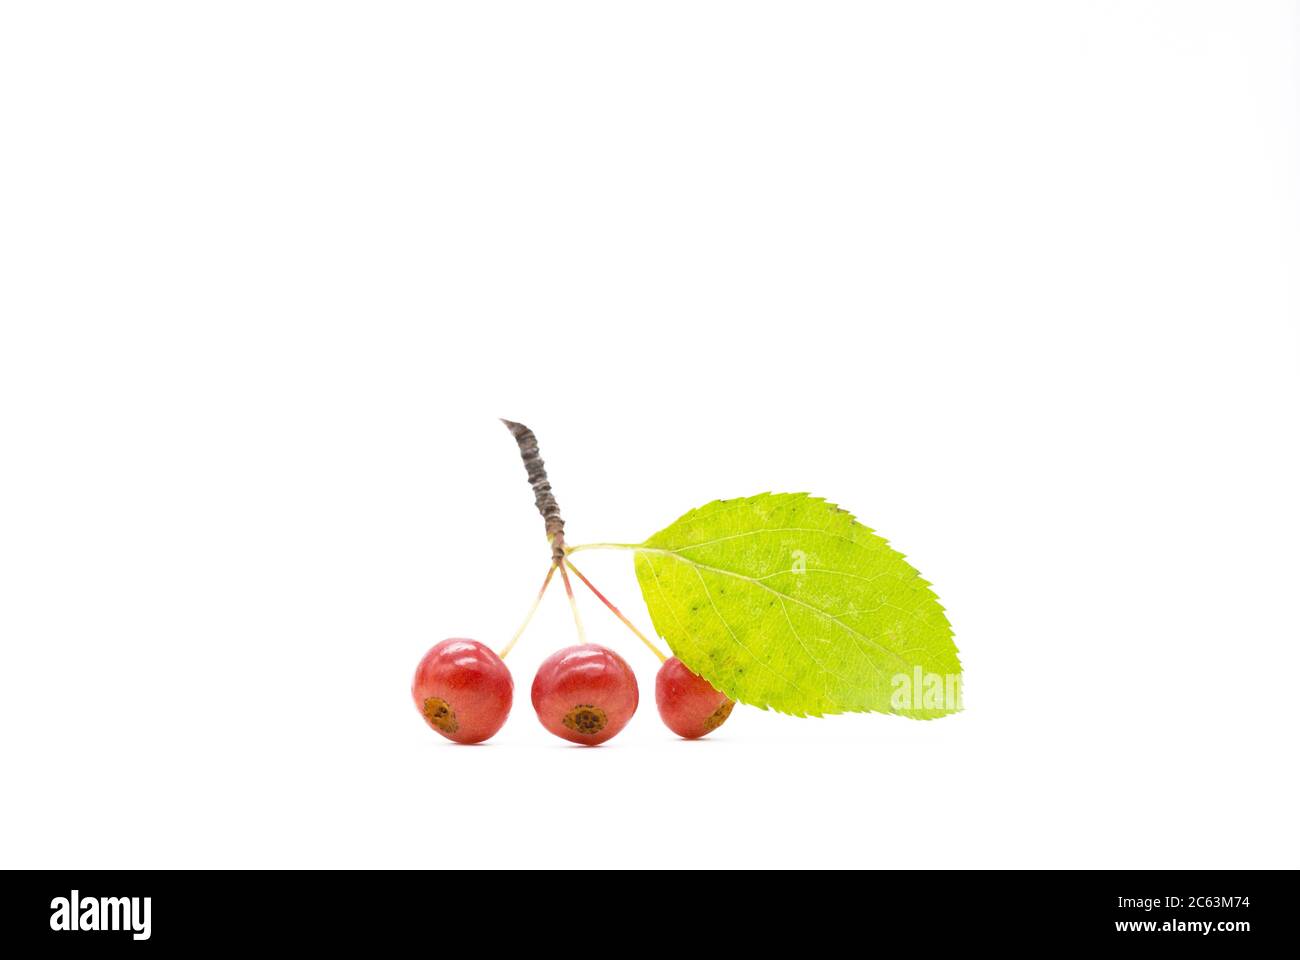 small apples on a branch. isolated Very small apples the size of a pea. Stock Photo